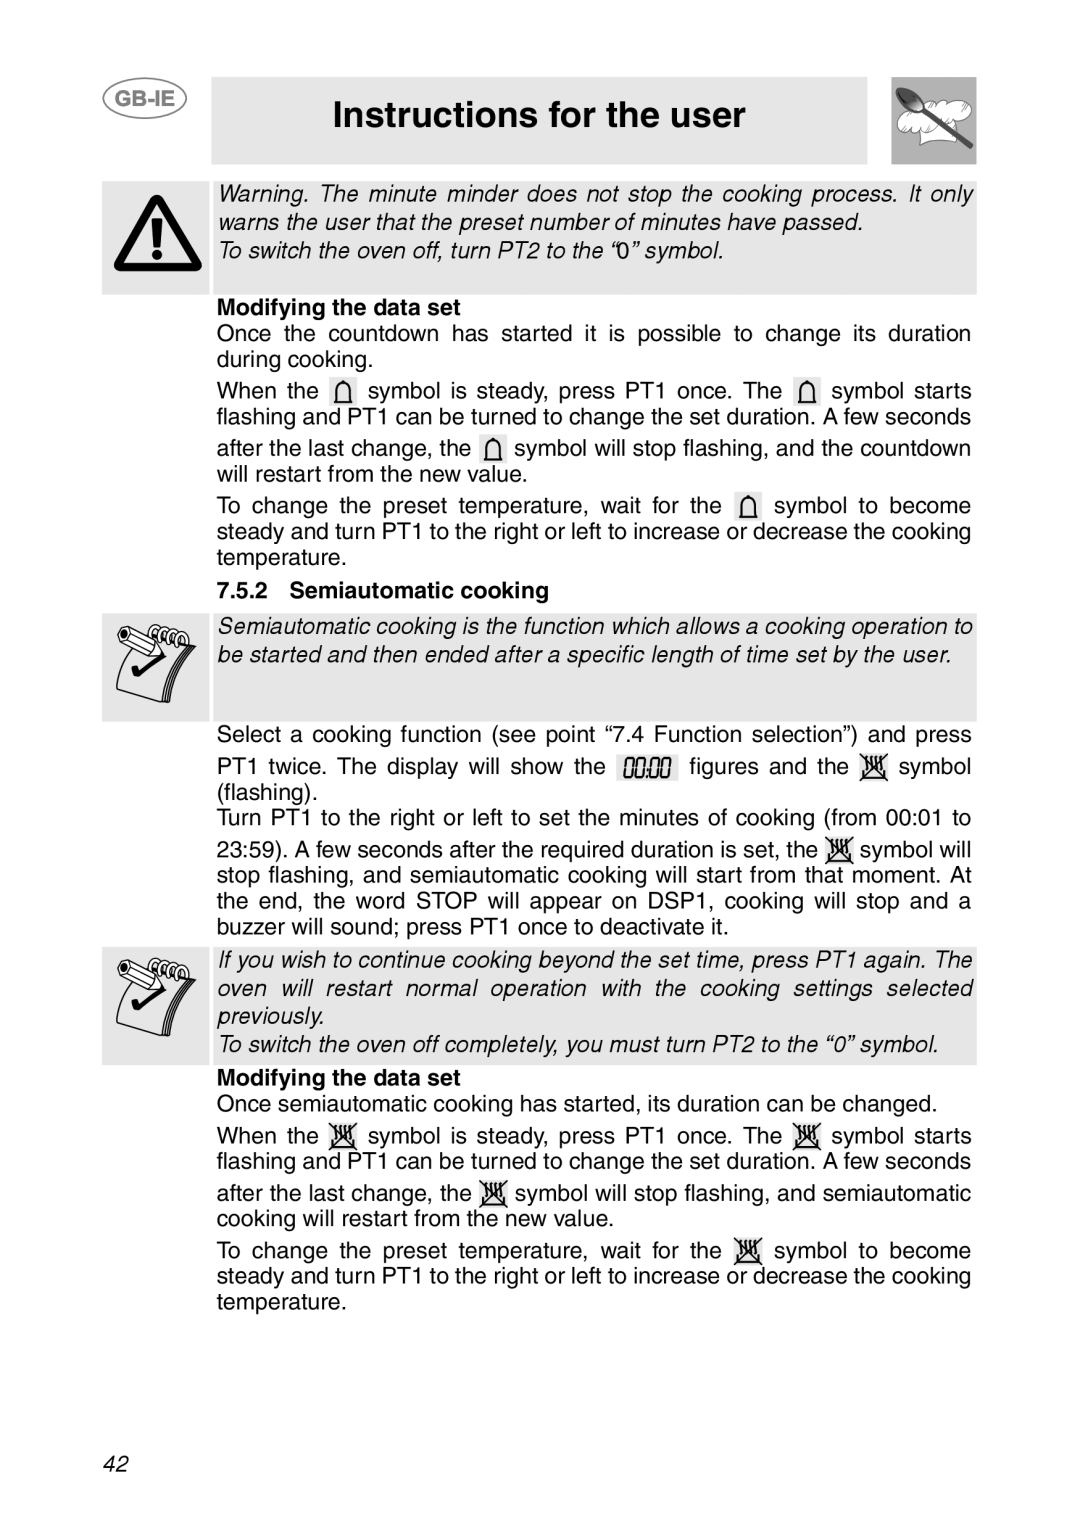 Smeg FP131B1 manual Instructions for the user, To switch the oven off, turn PT2 to the “0” symbol, Modifying the data set 